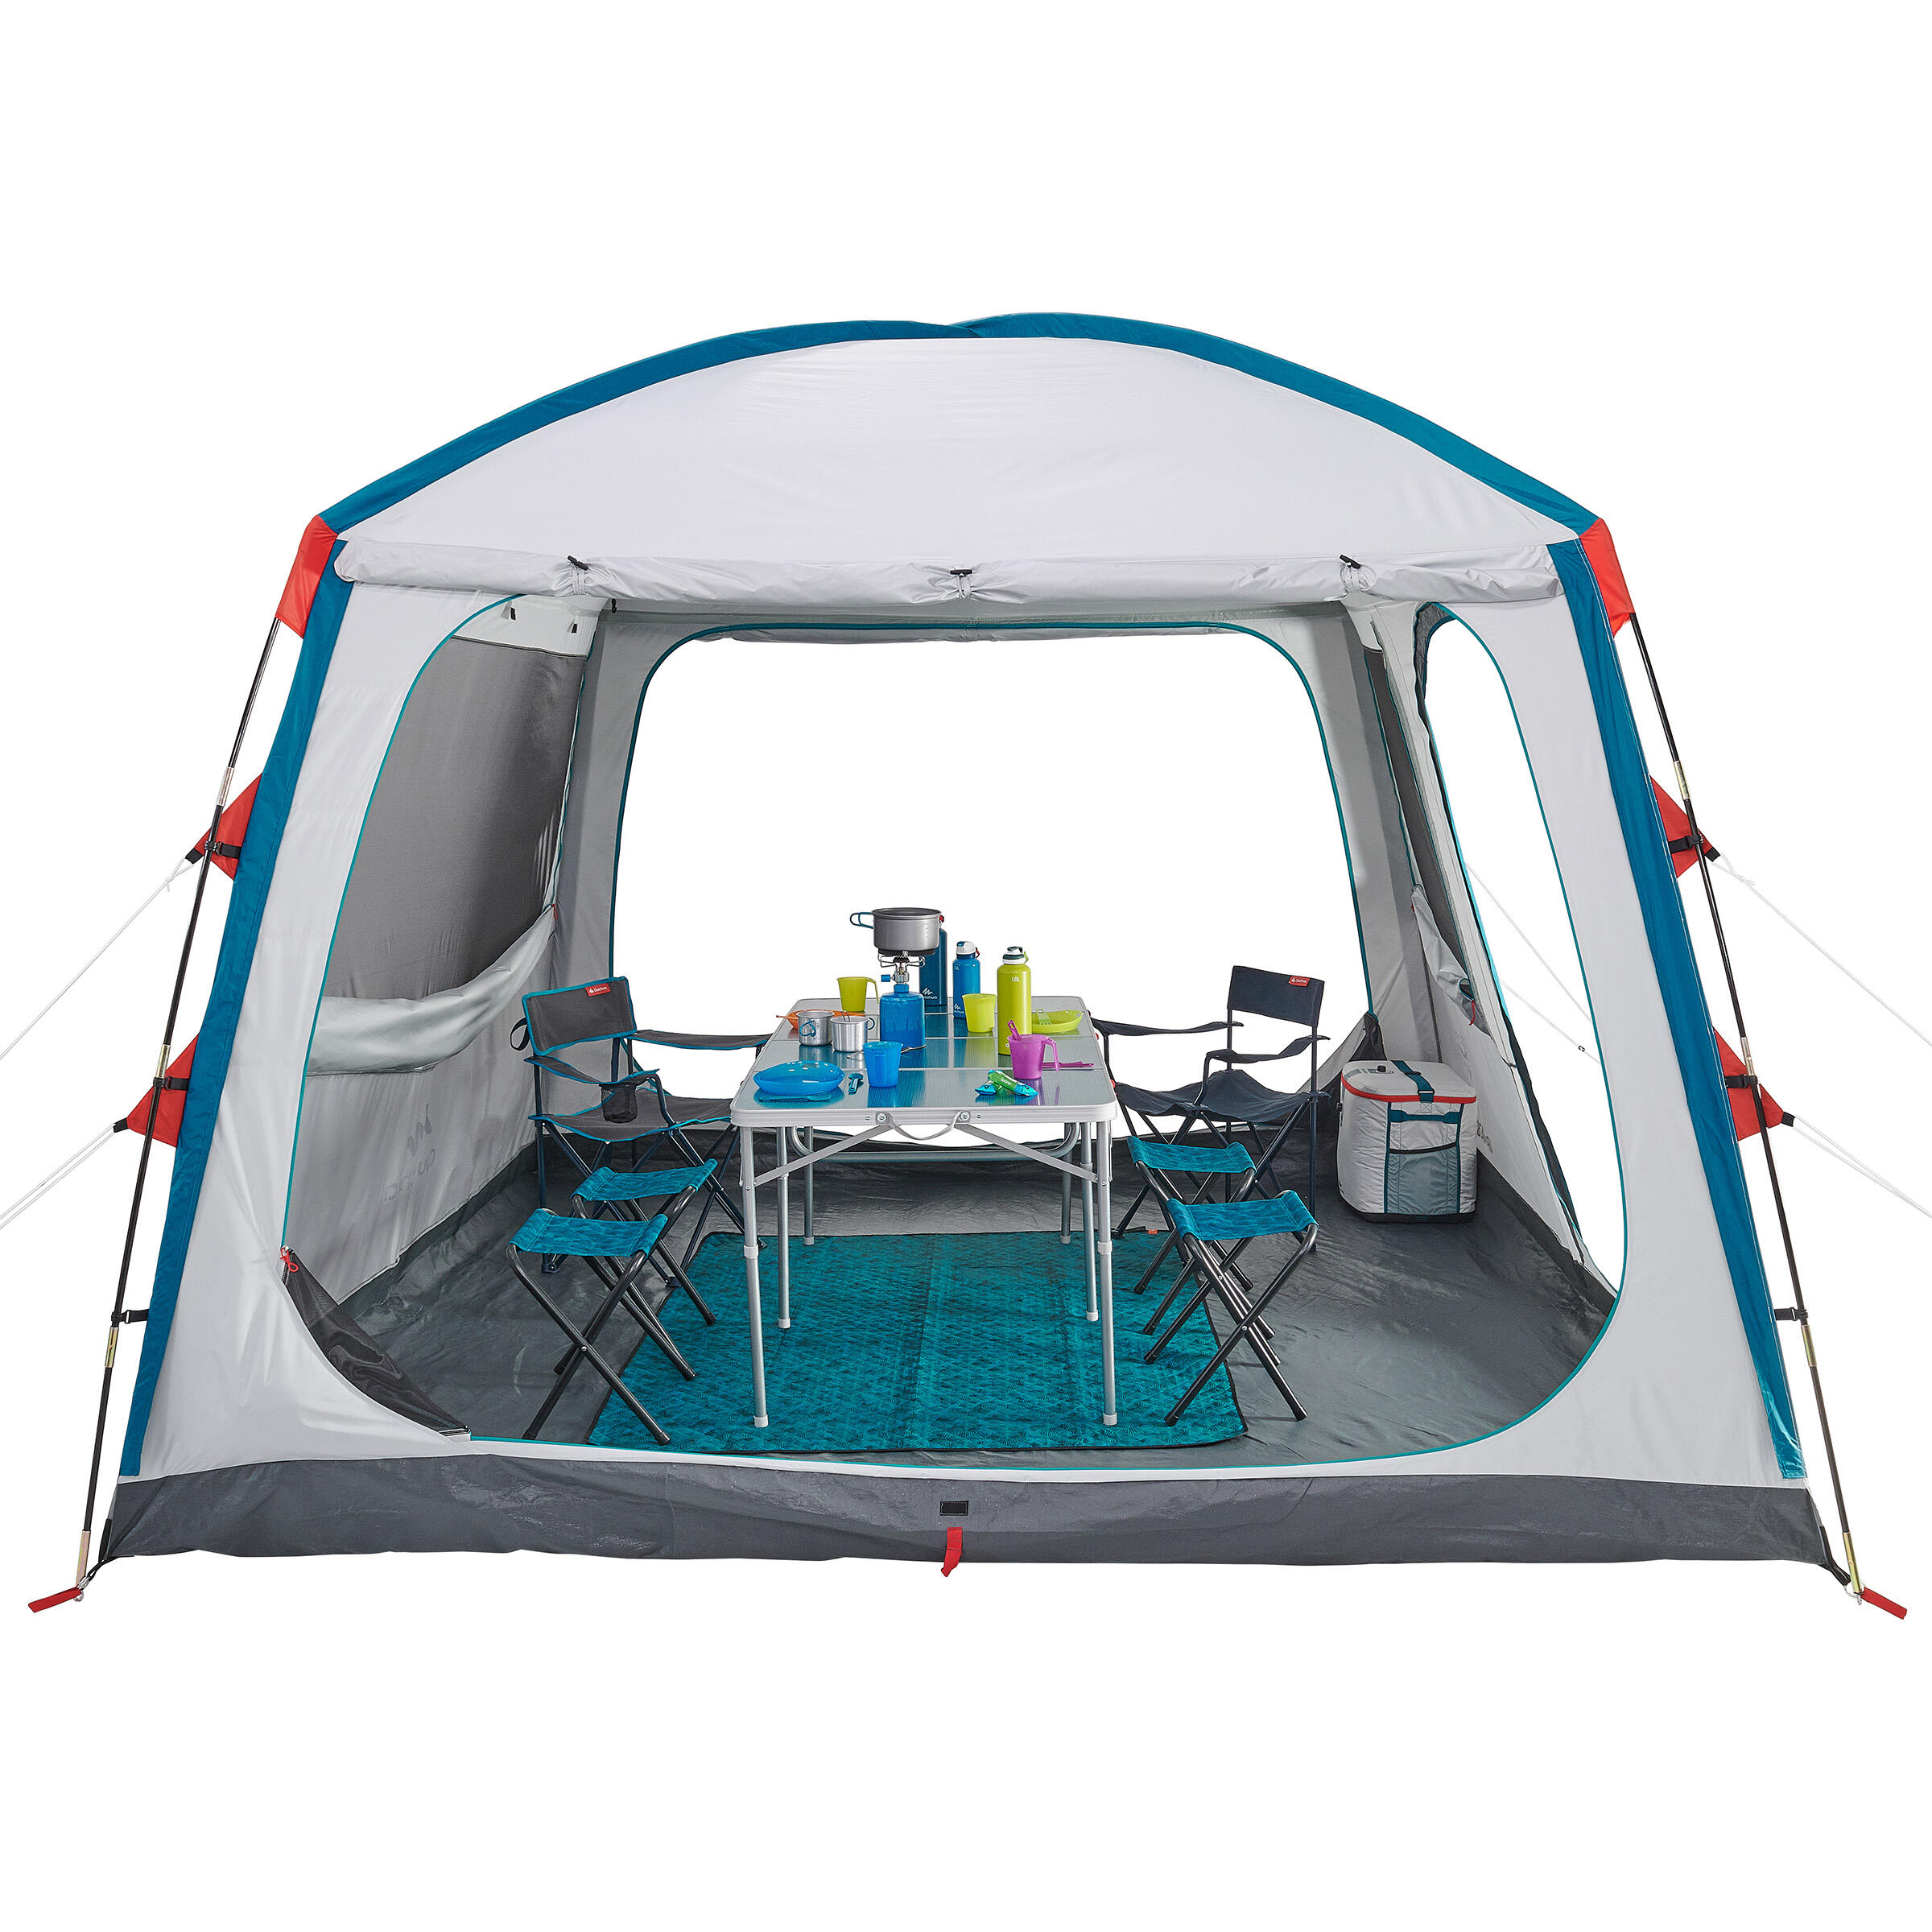 Buy Camping Base 10 person tent online 